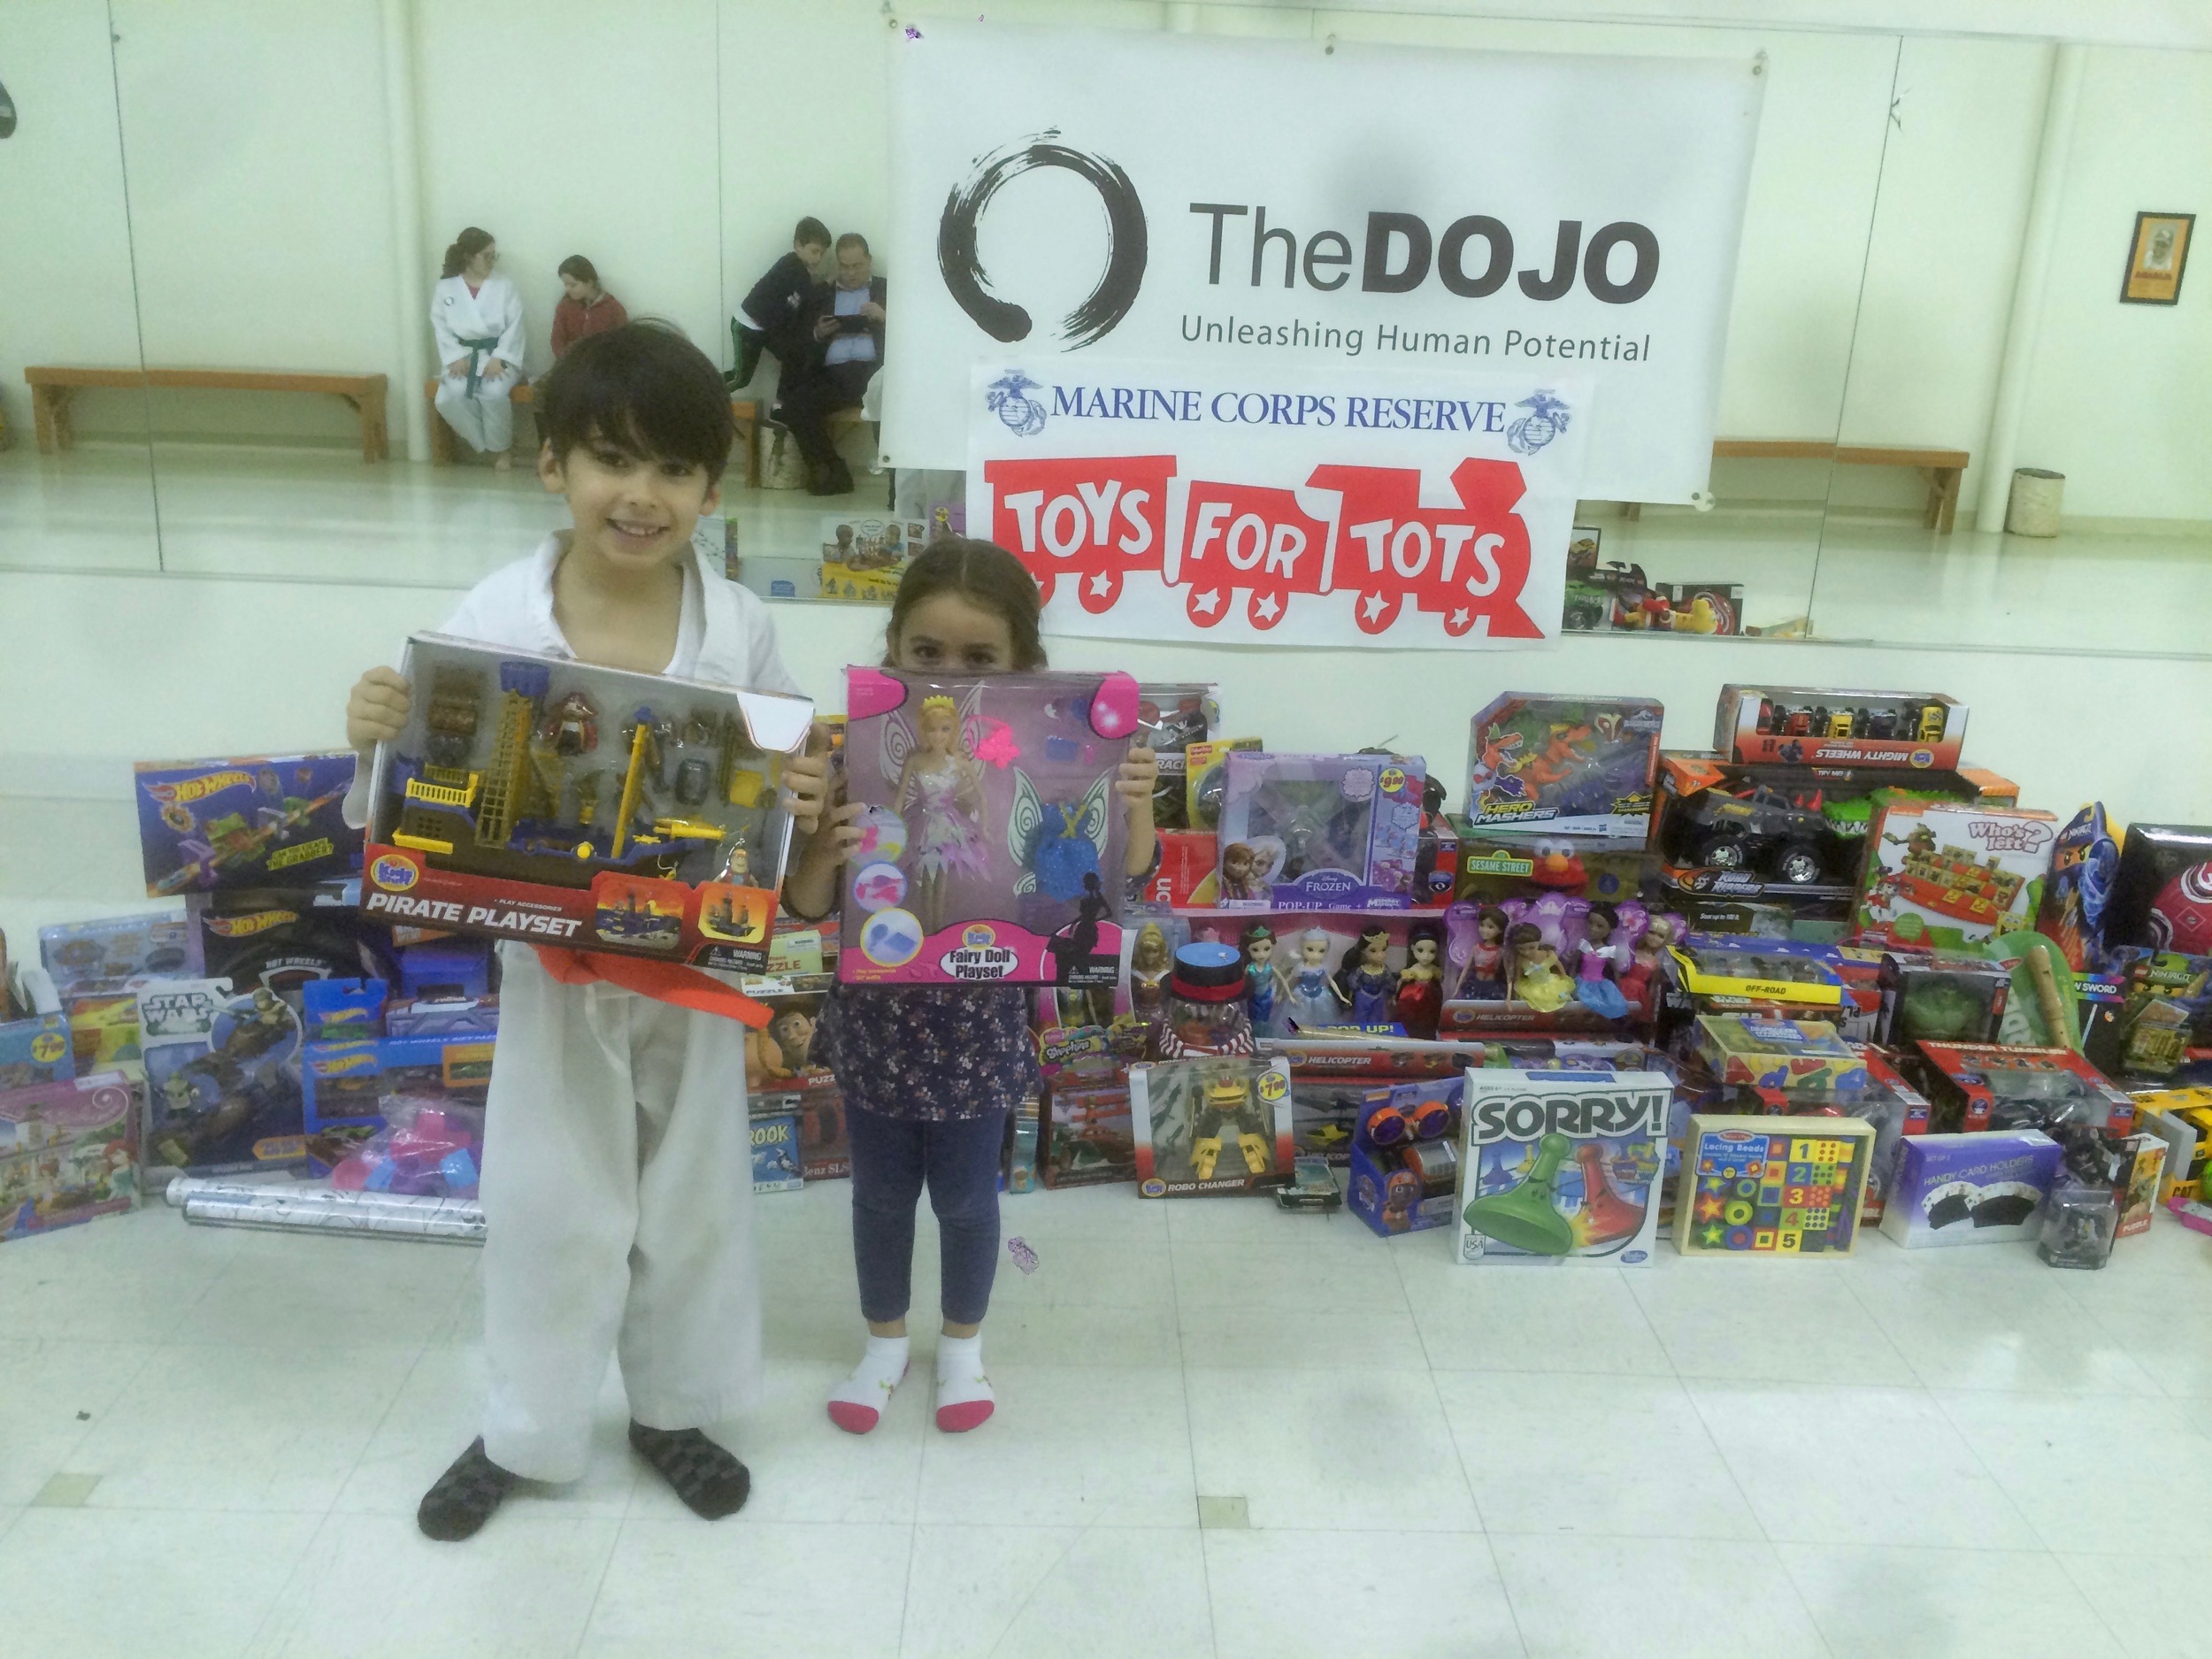 toys-for-tots---thedojo-toy-drive_23203018023_o.jpg